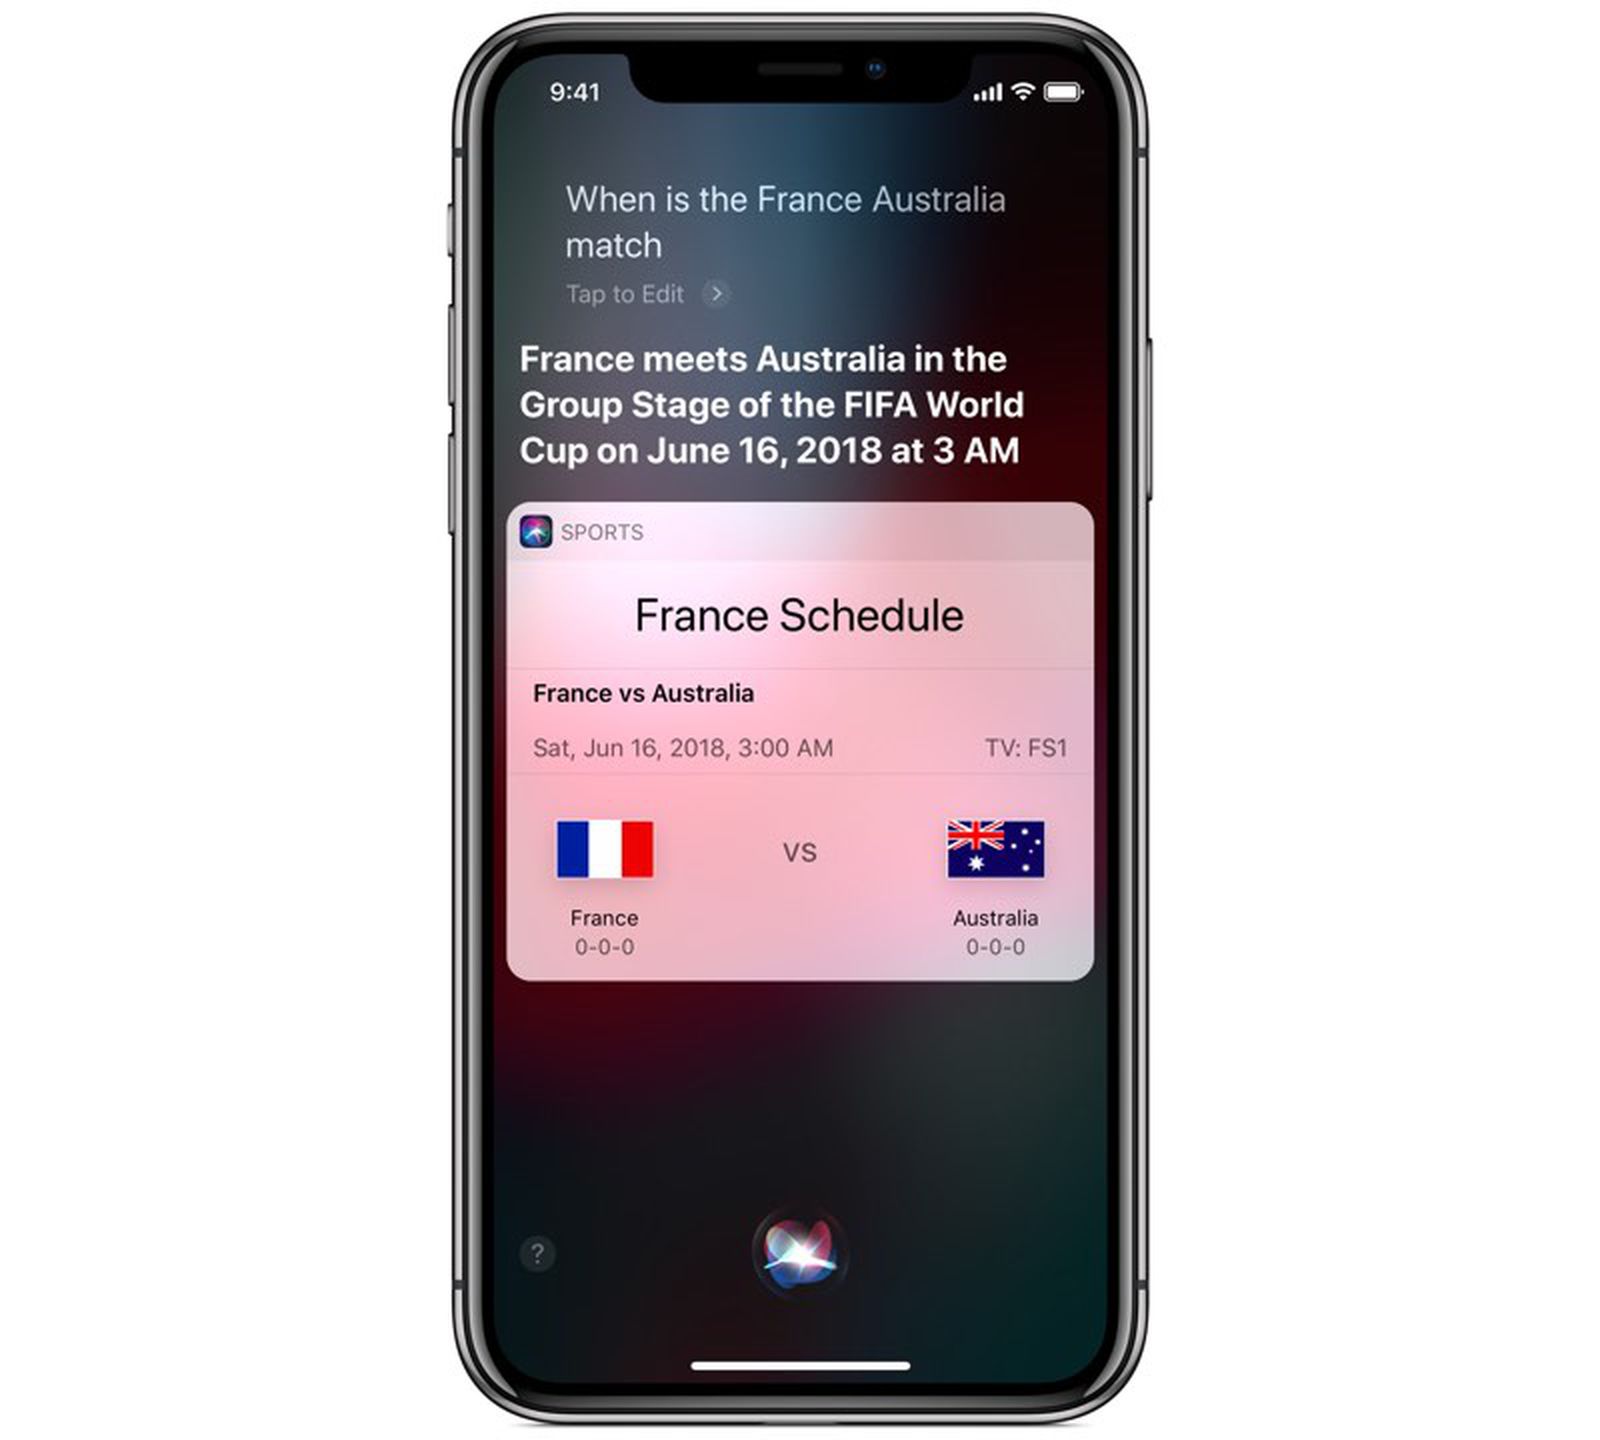 Apple Announces World Cup Content Coming to Apple News, App Store, iBooks and More - MacRumors